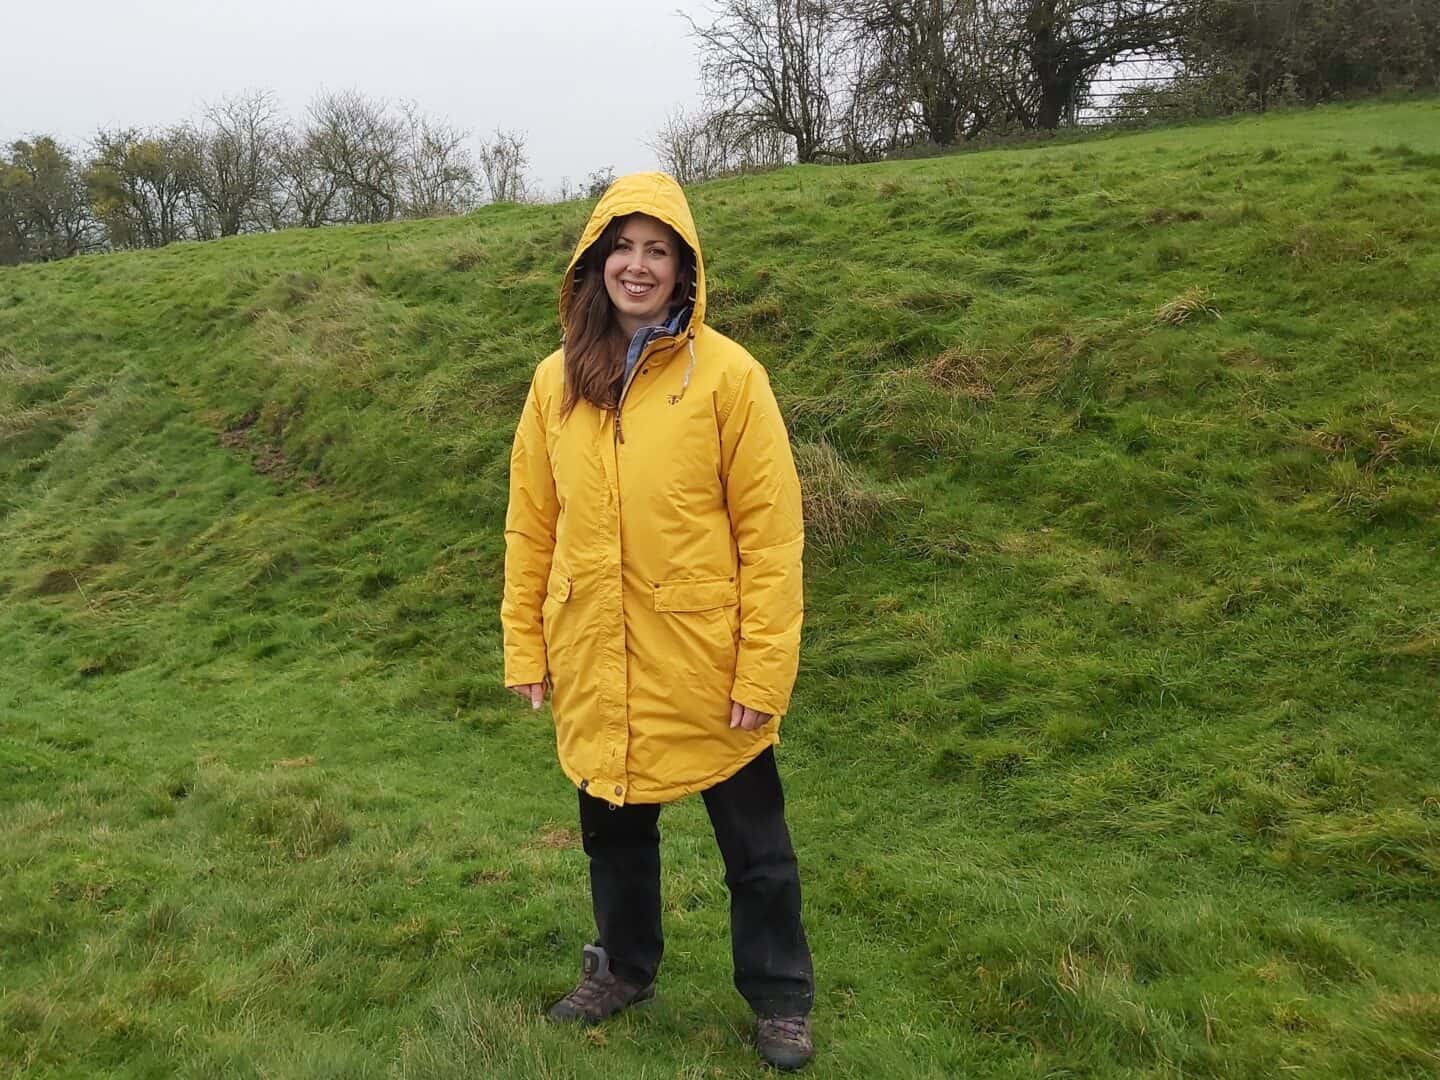 Facing towards the camera wearing yellow raincoat and black trousers with muddy shoes standing on grassy bank 